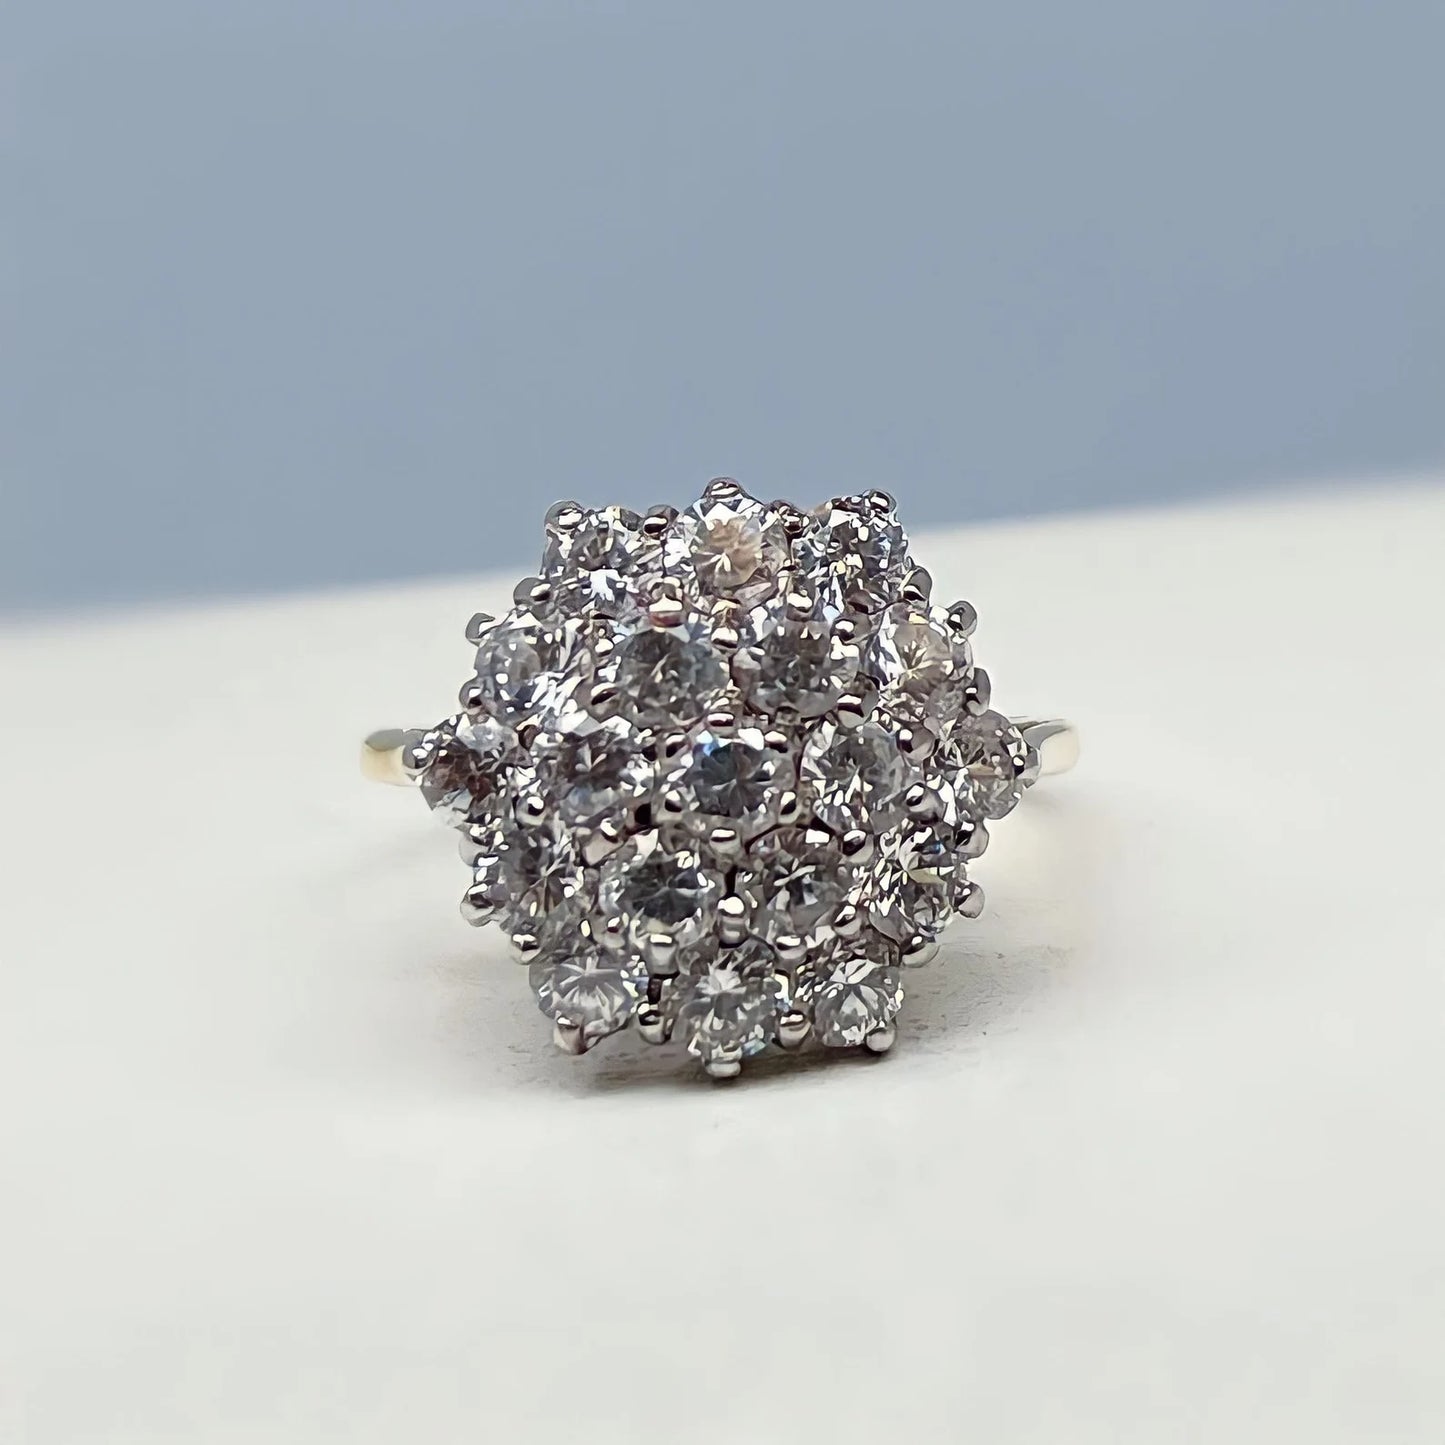 Vintage 9ct Gold Cubic Zirconia Cluster Ring - Size M